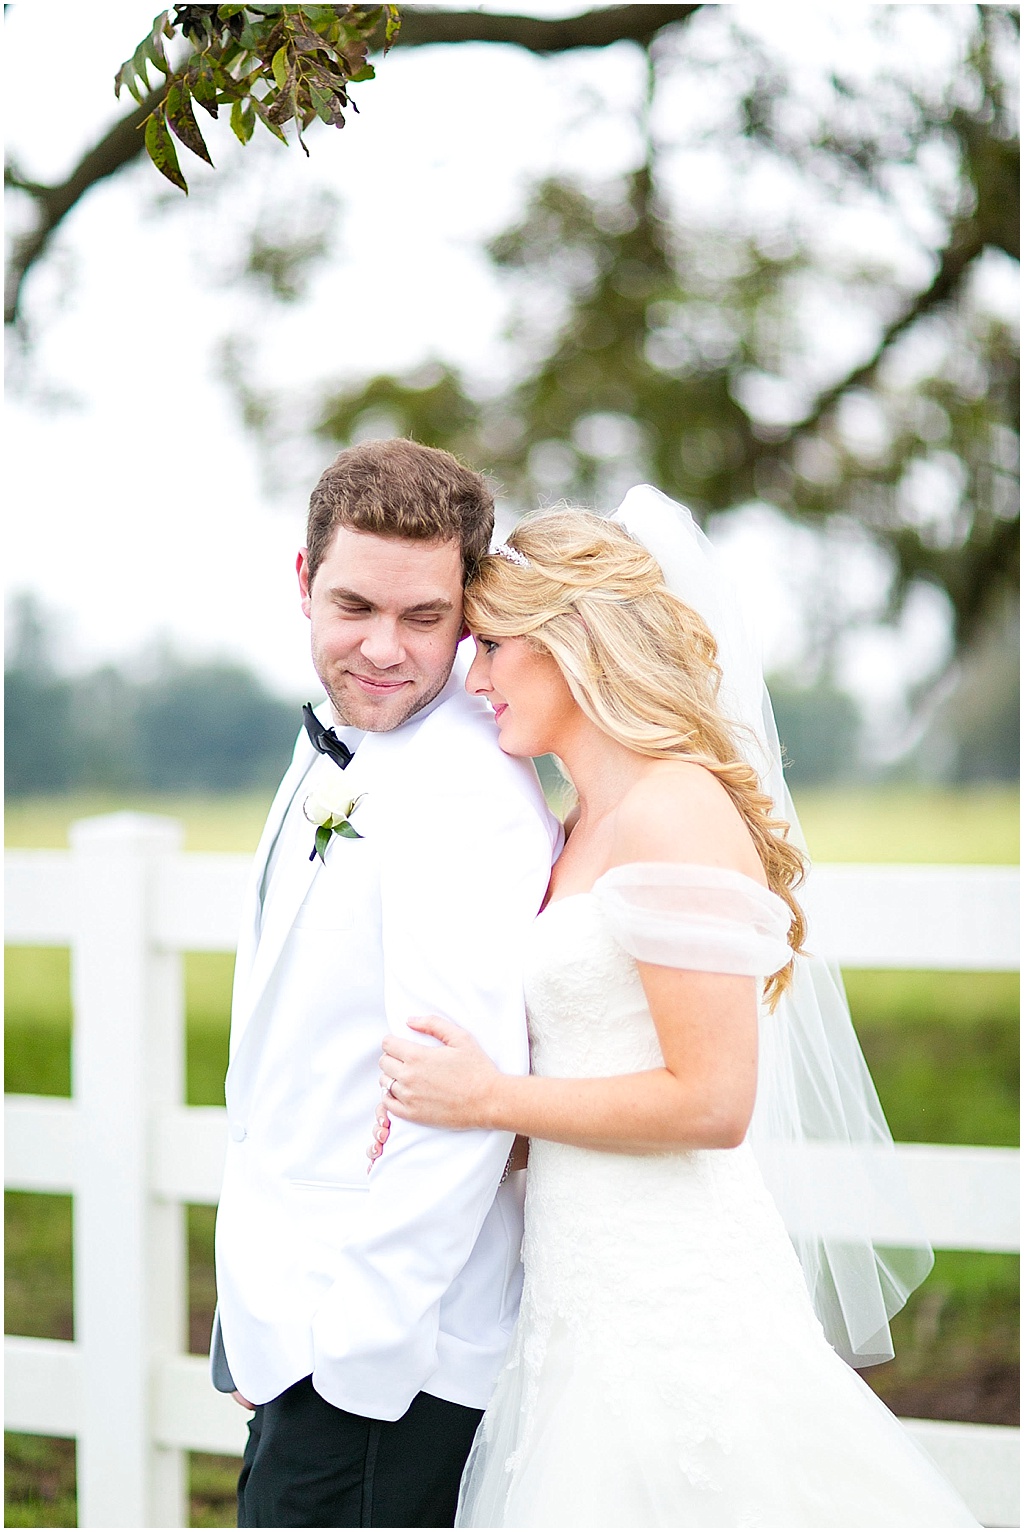 View More: http://maryfieldsphotography.pass.us/beach-wedding11-16-14